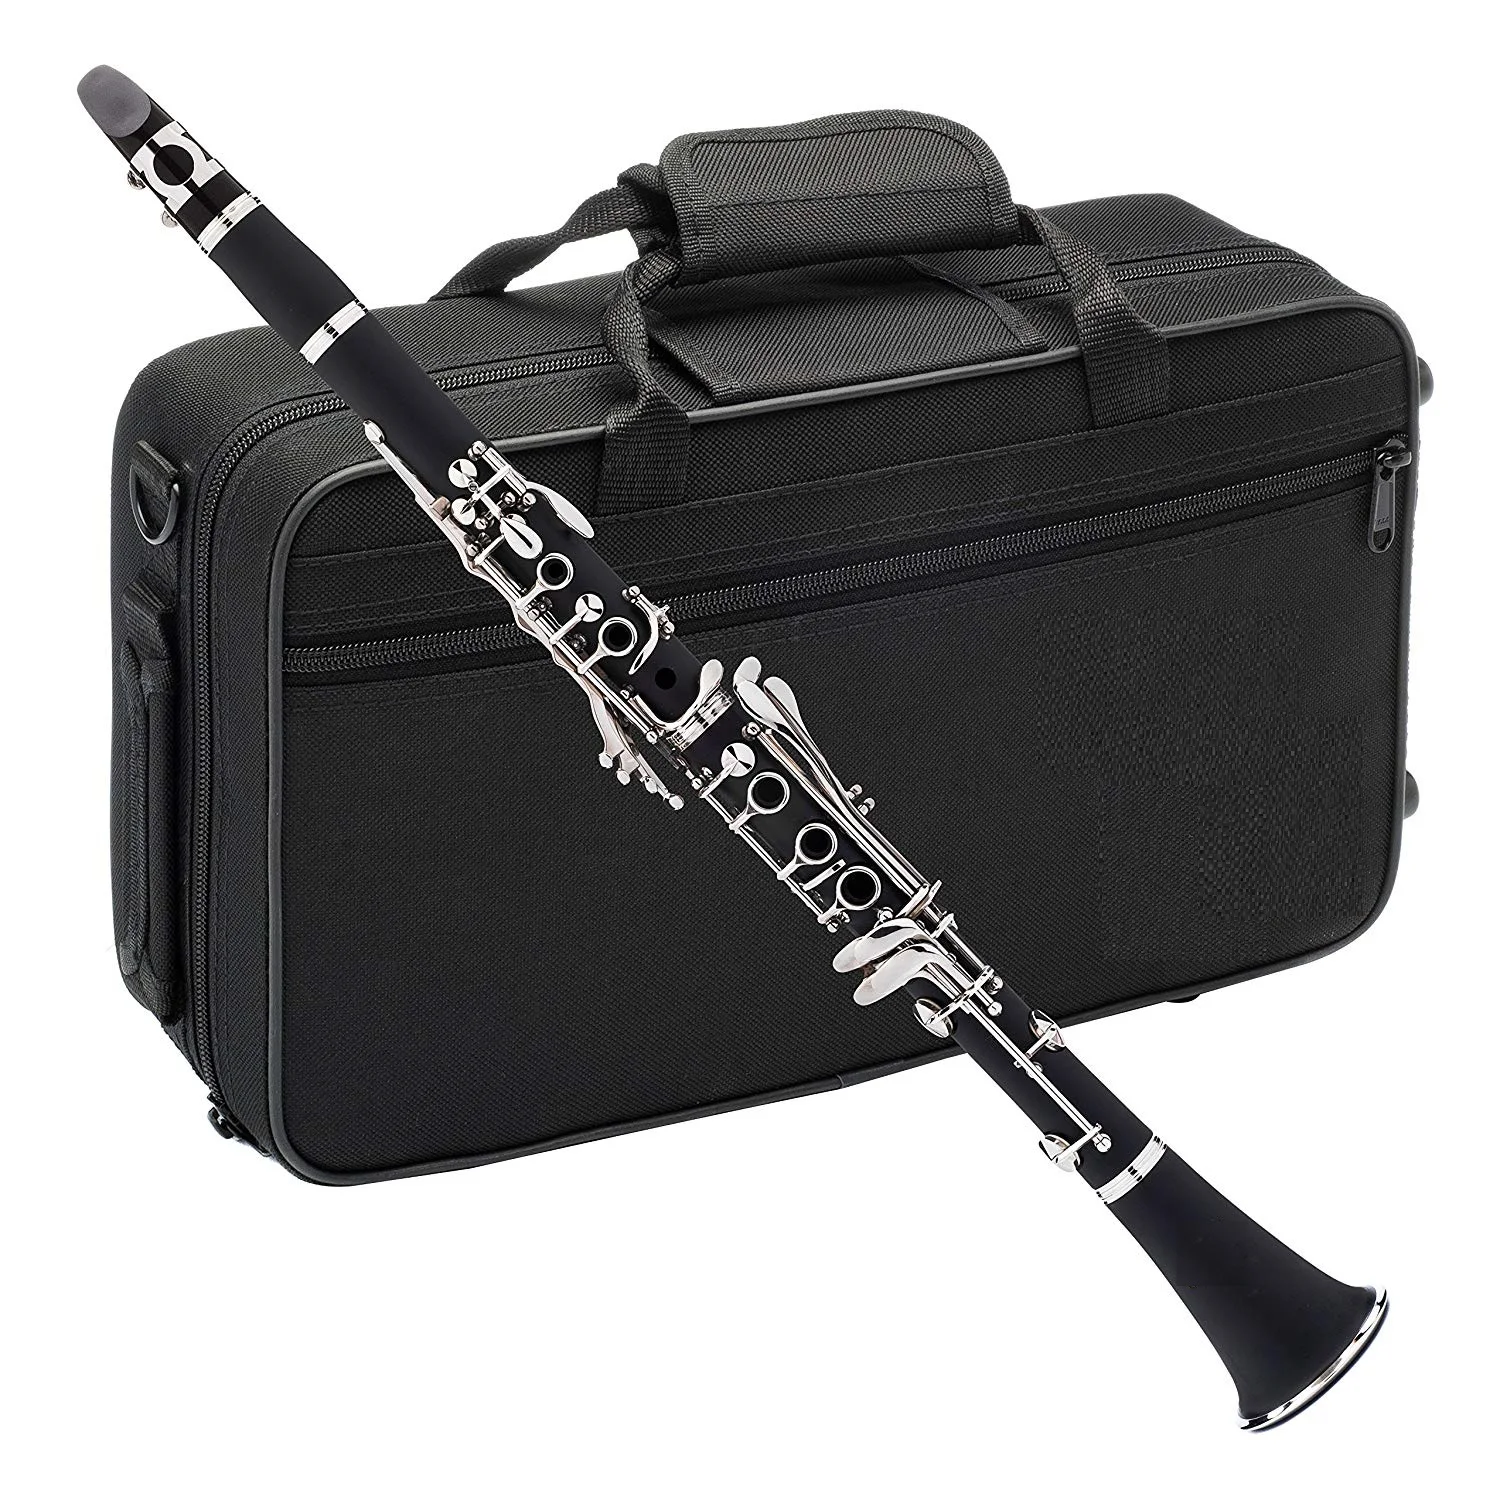 Clarinet　HCL-102　clarinet|　for　clarinet　beginner　/student　professional　level